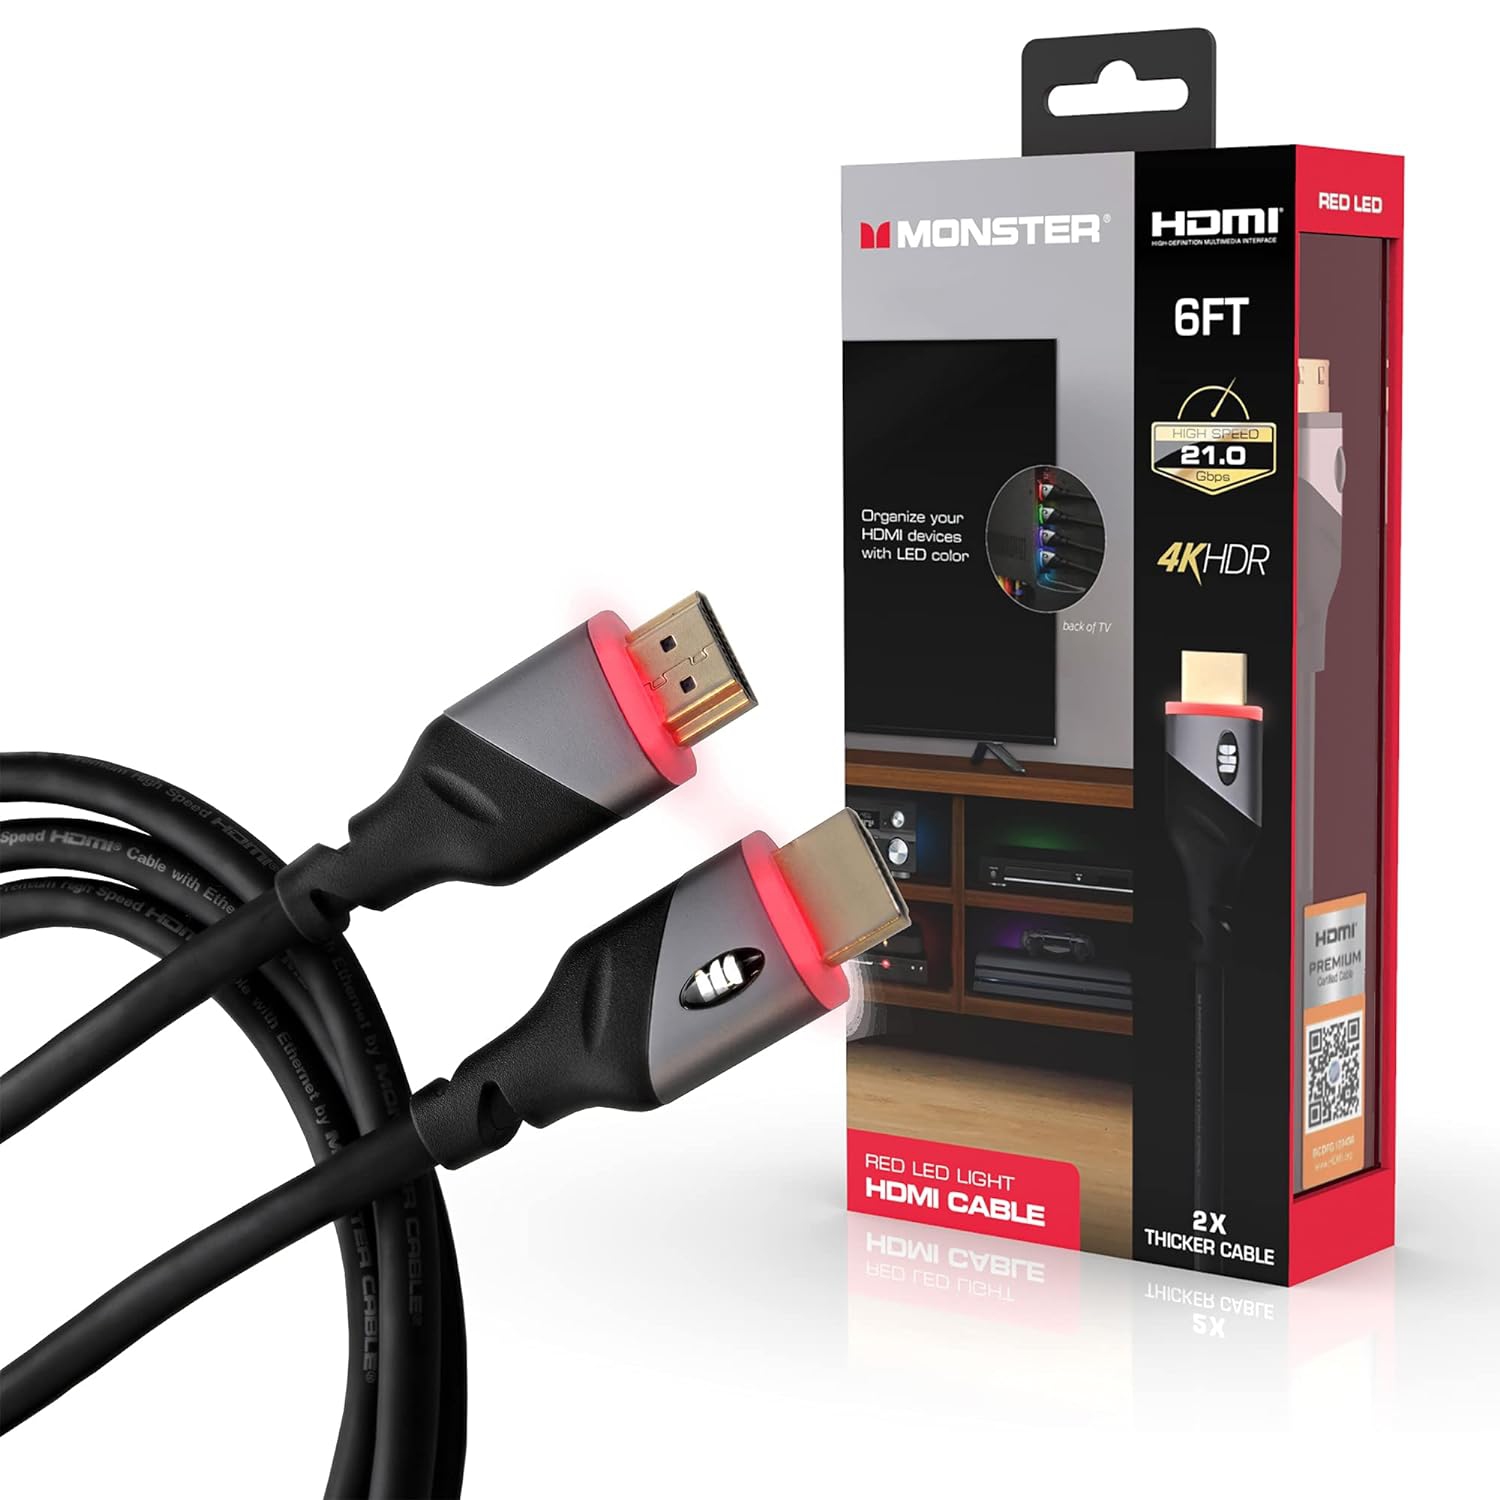 Monster - High Speed 4K HDR HDMI Cable with Built-in Red LED, 6 Feet Long